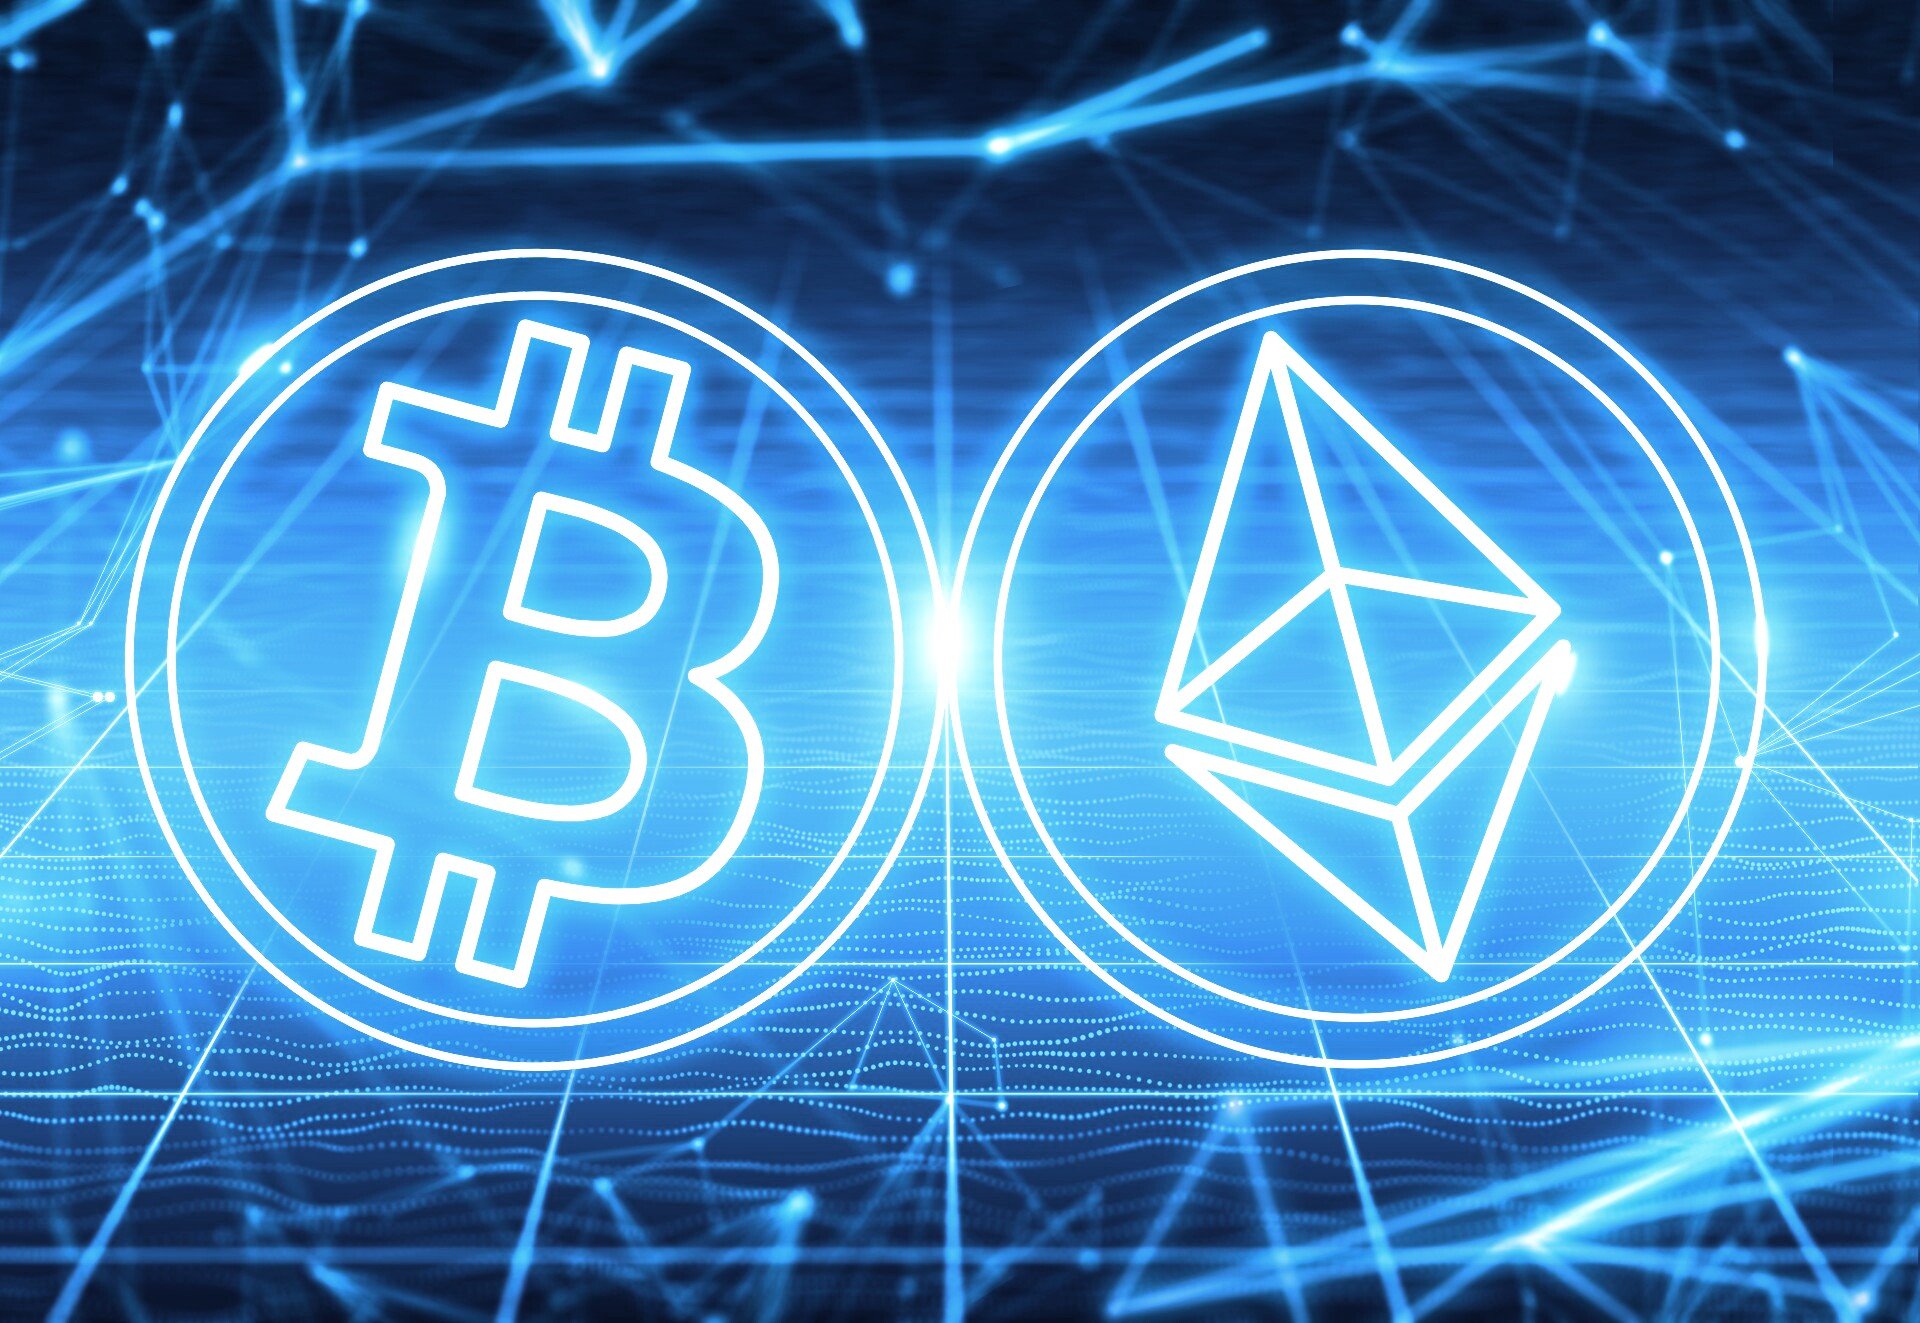 Bitcoin, Ethereum Recover Lost Ground as Crypto Markets Rebound